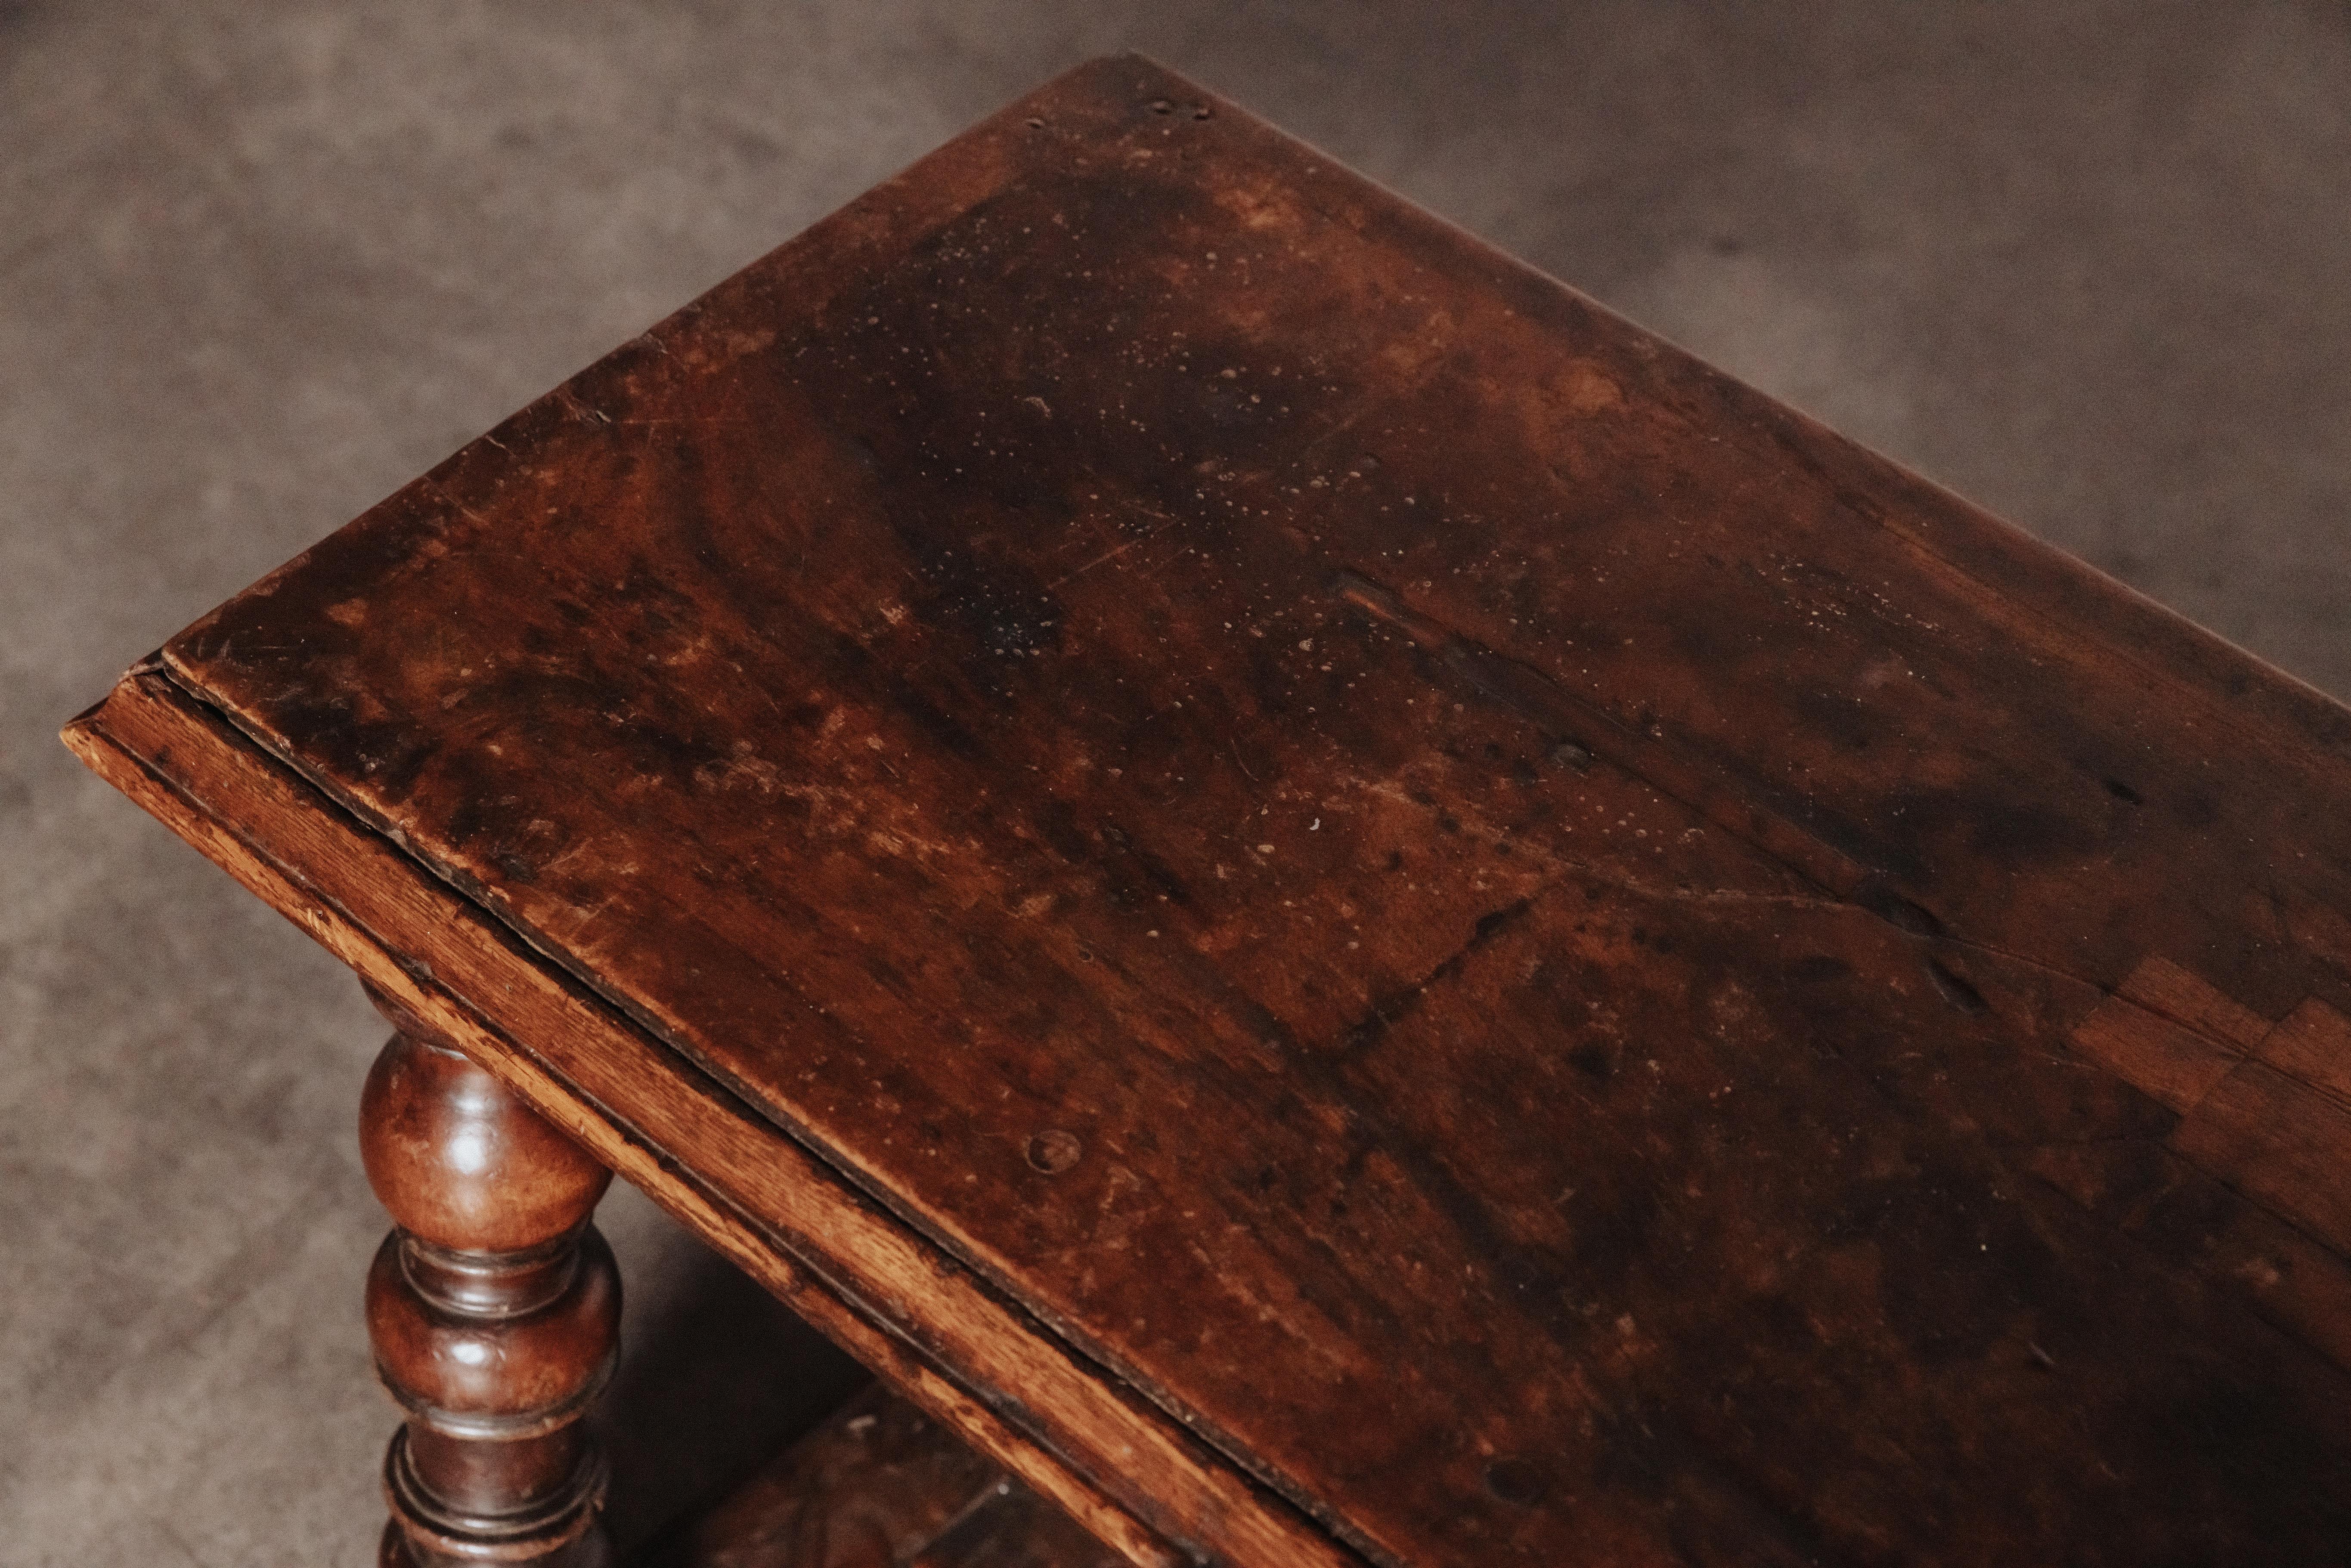 Early Walnut Side Table From Italy, Circa 1800.  Solid walnut construction with nice original patina and wear.